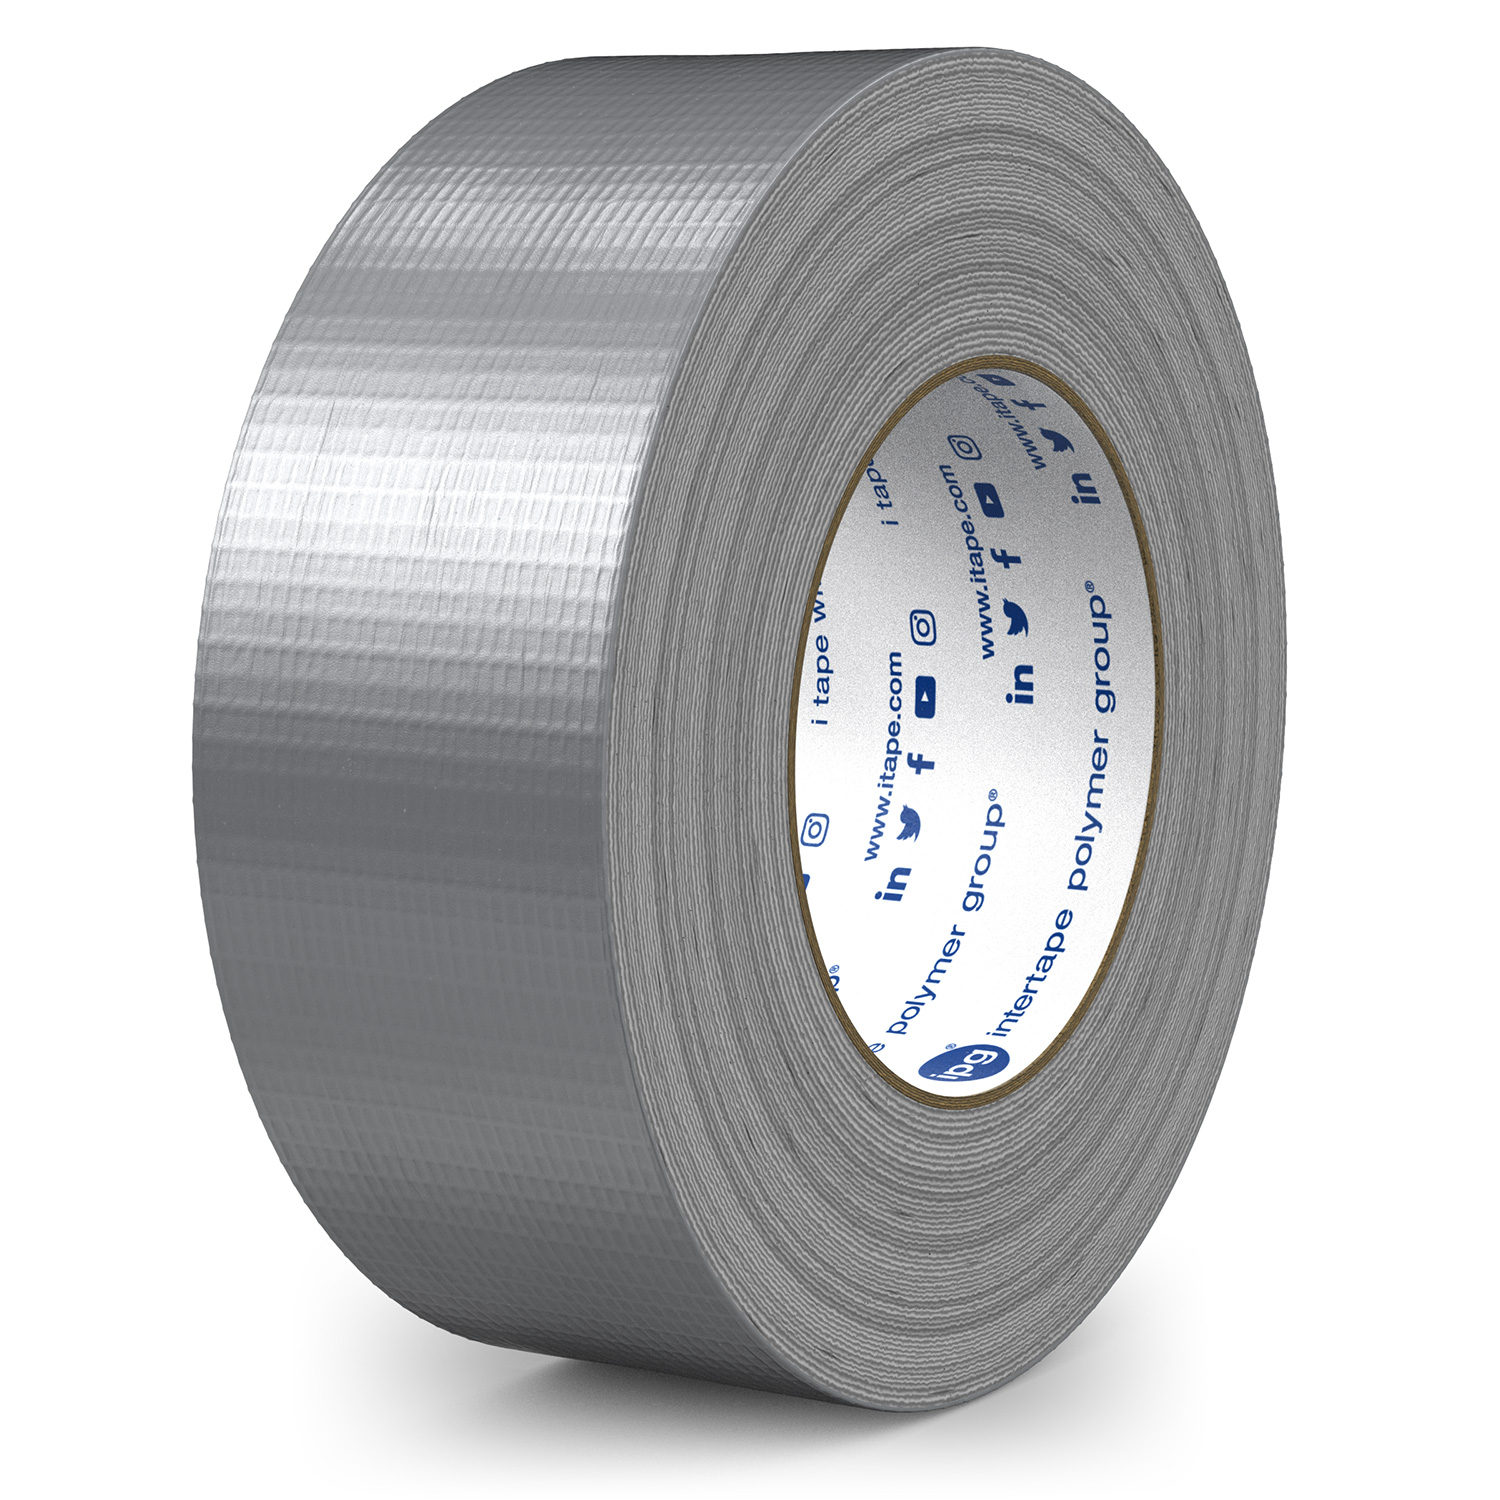 Cold Weather Aluminum Foil Tape - IPG